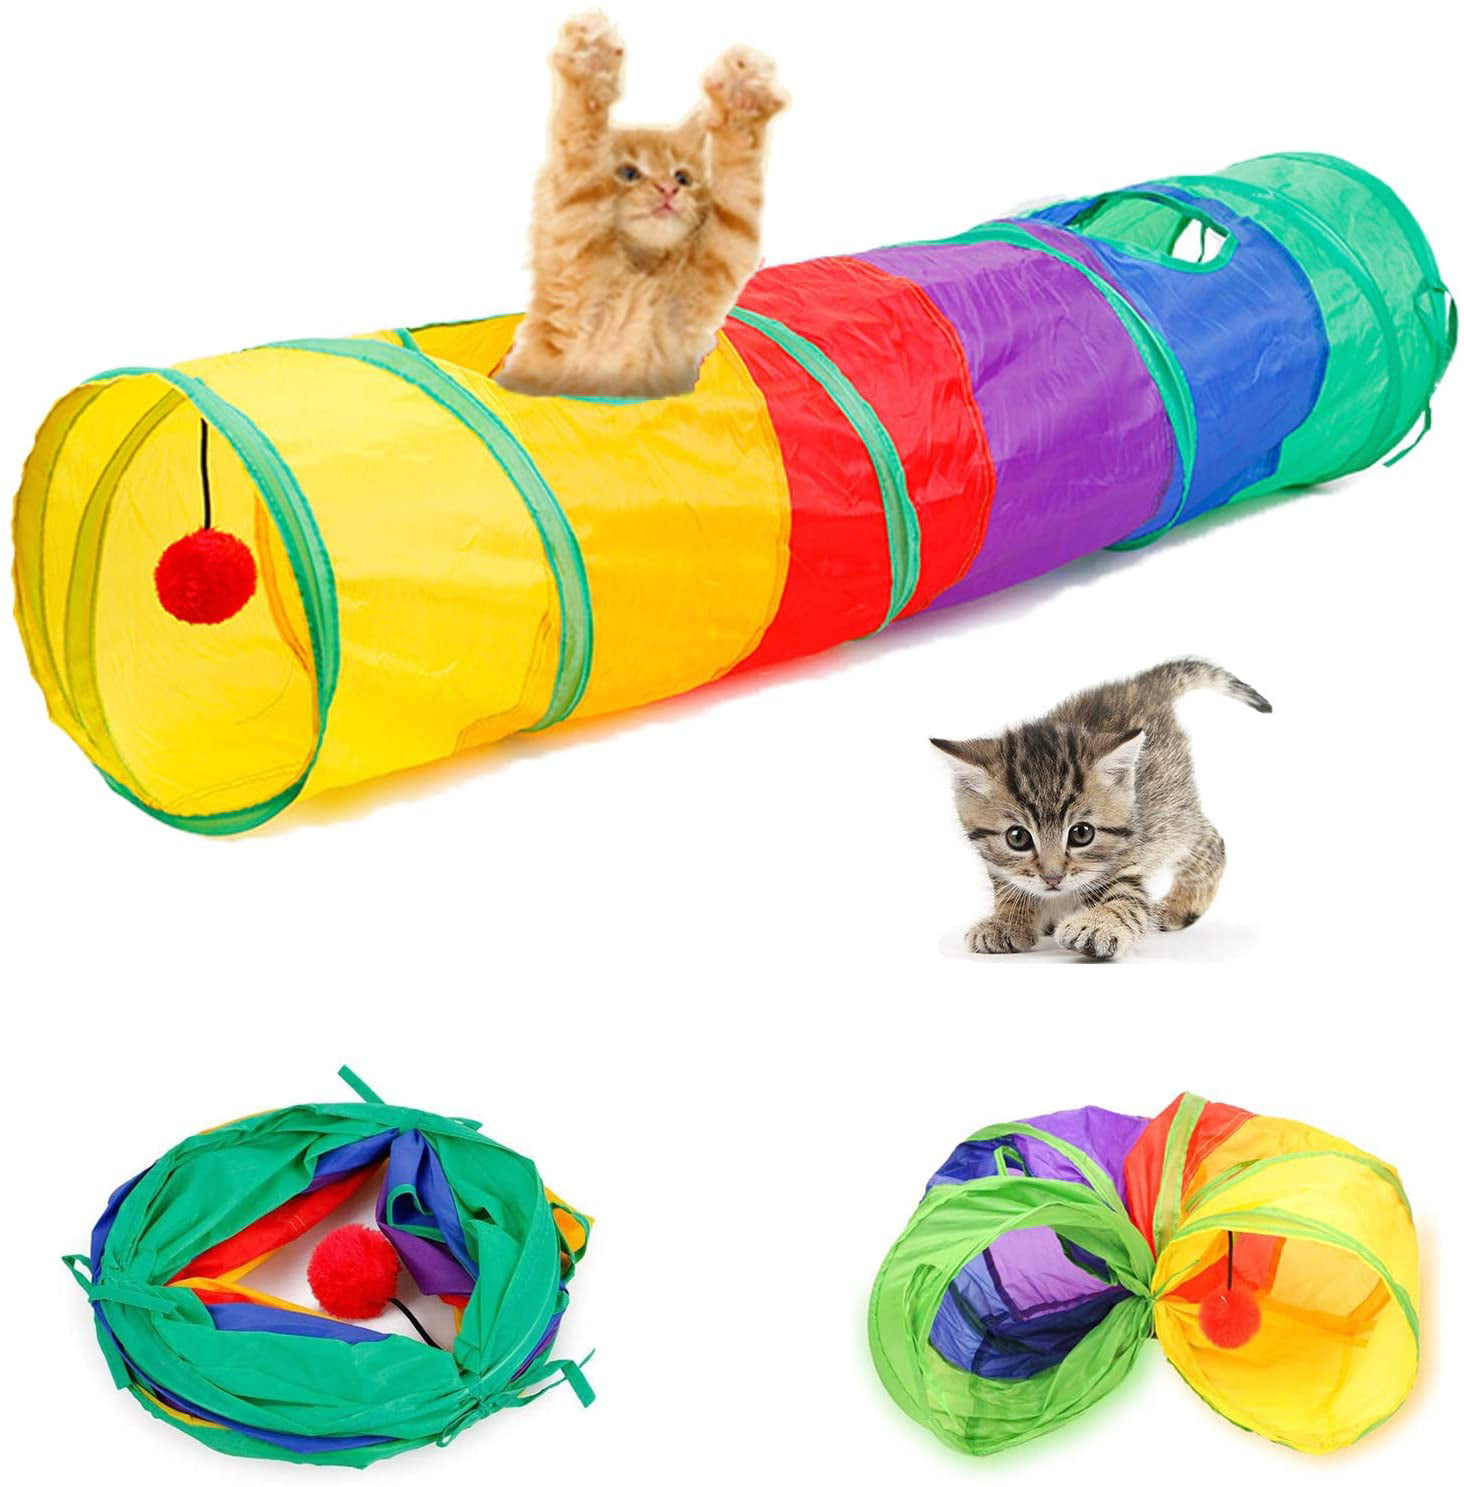 Prima Cat Play Tunnel Collapsible Tube Toy Suede for Small Animals Bunnies Kittens with Crinkle Paper 